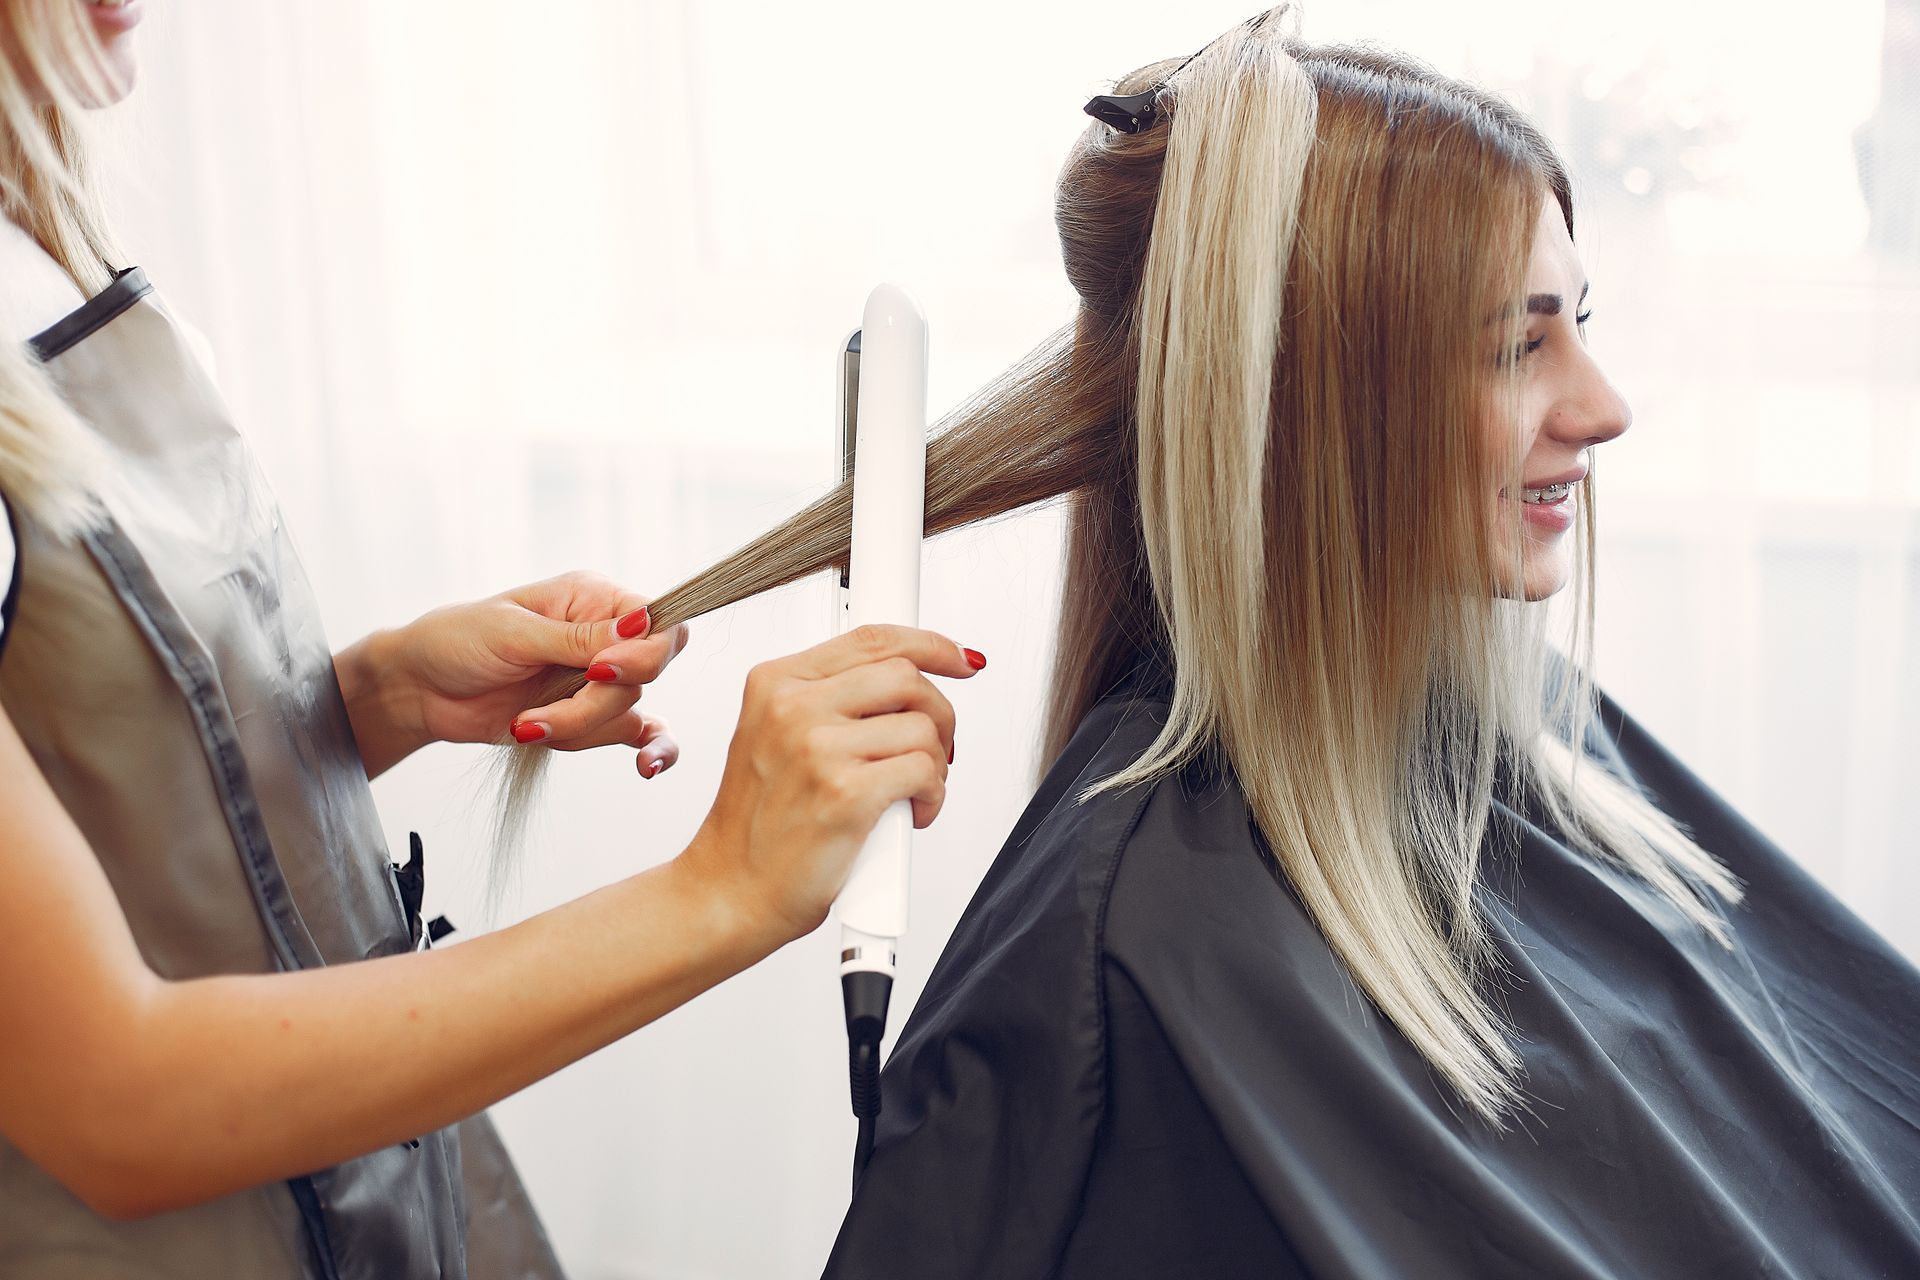 a woman is getting her hair straightened by a hairdresser in a salon